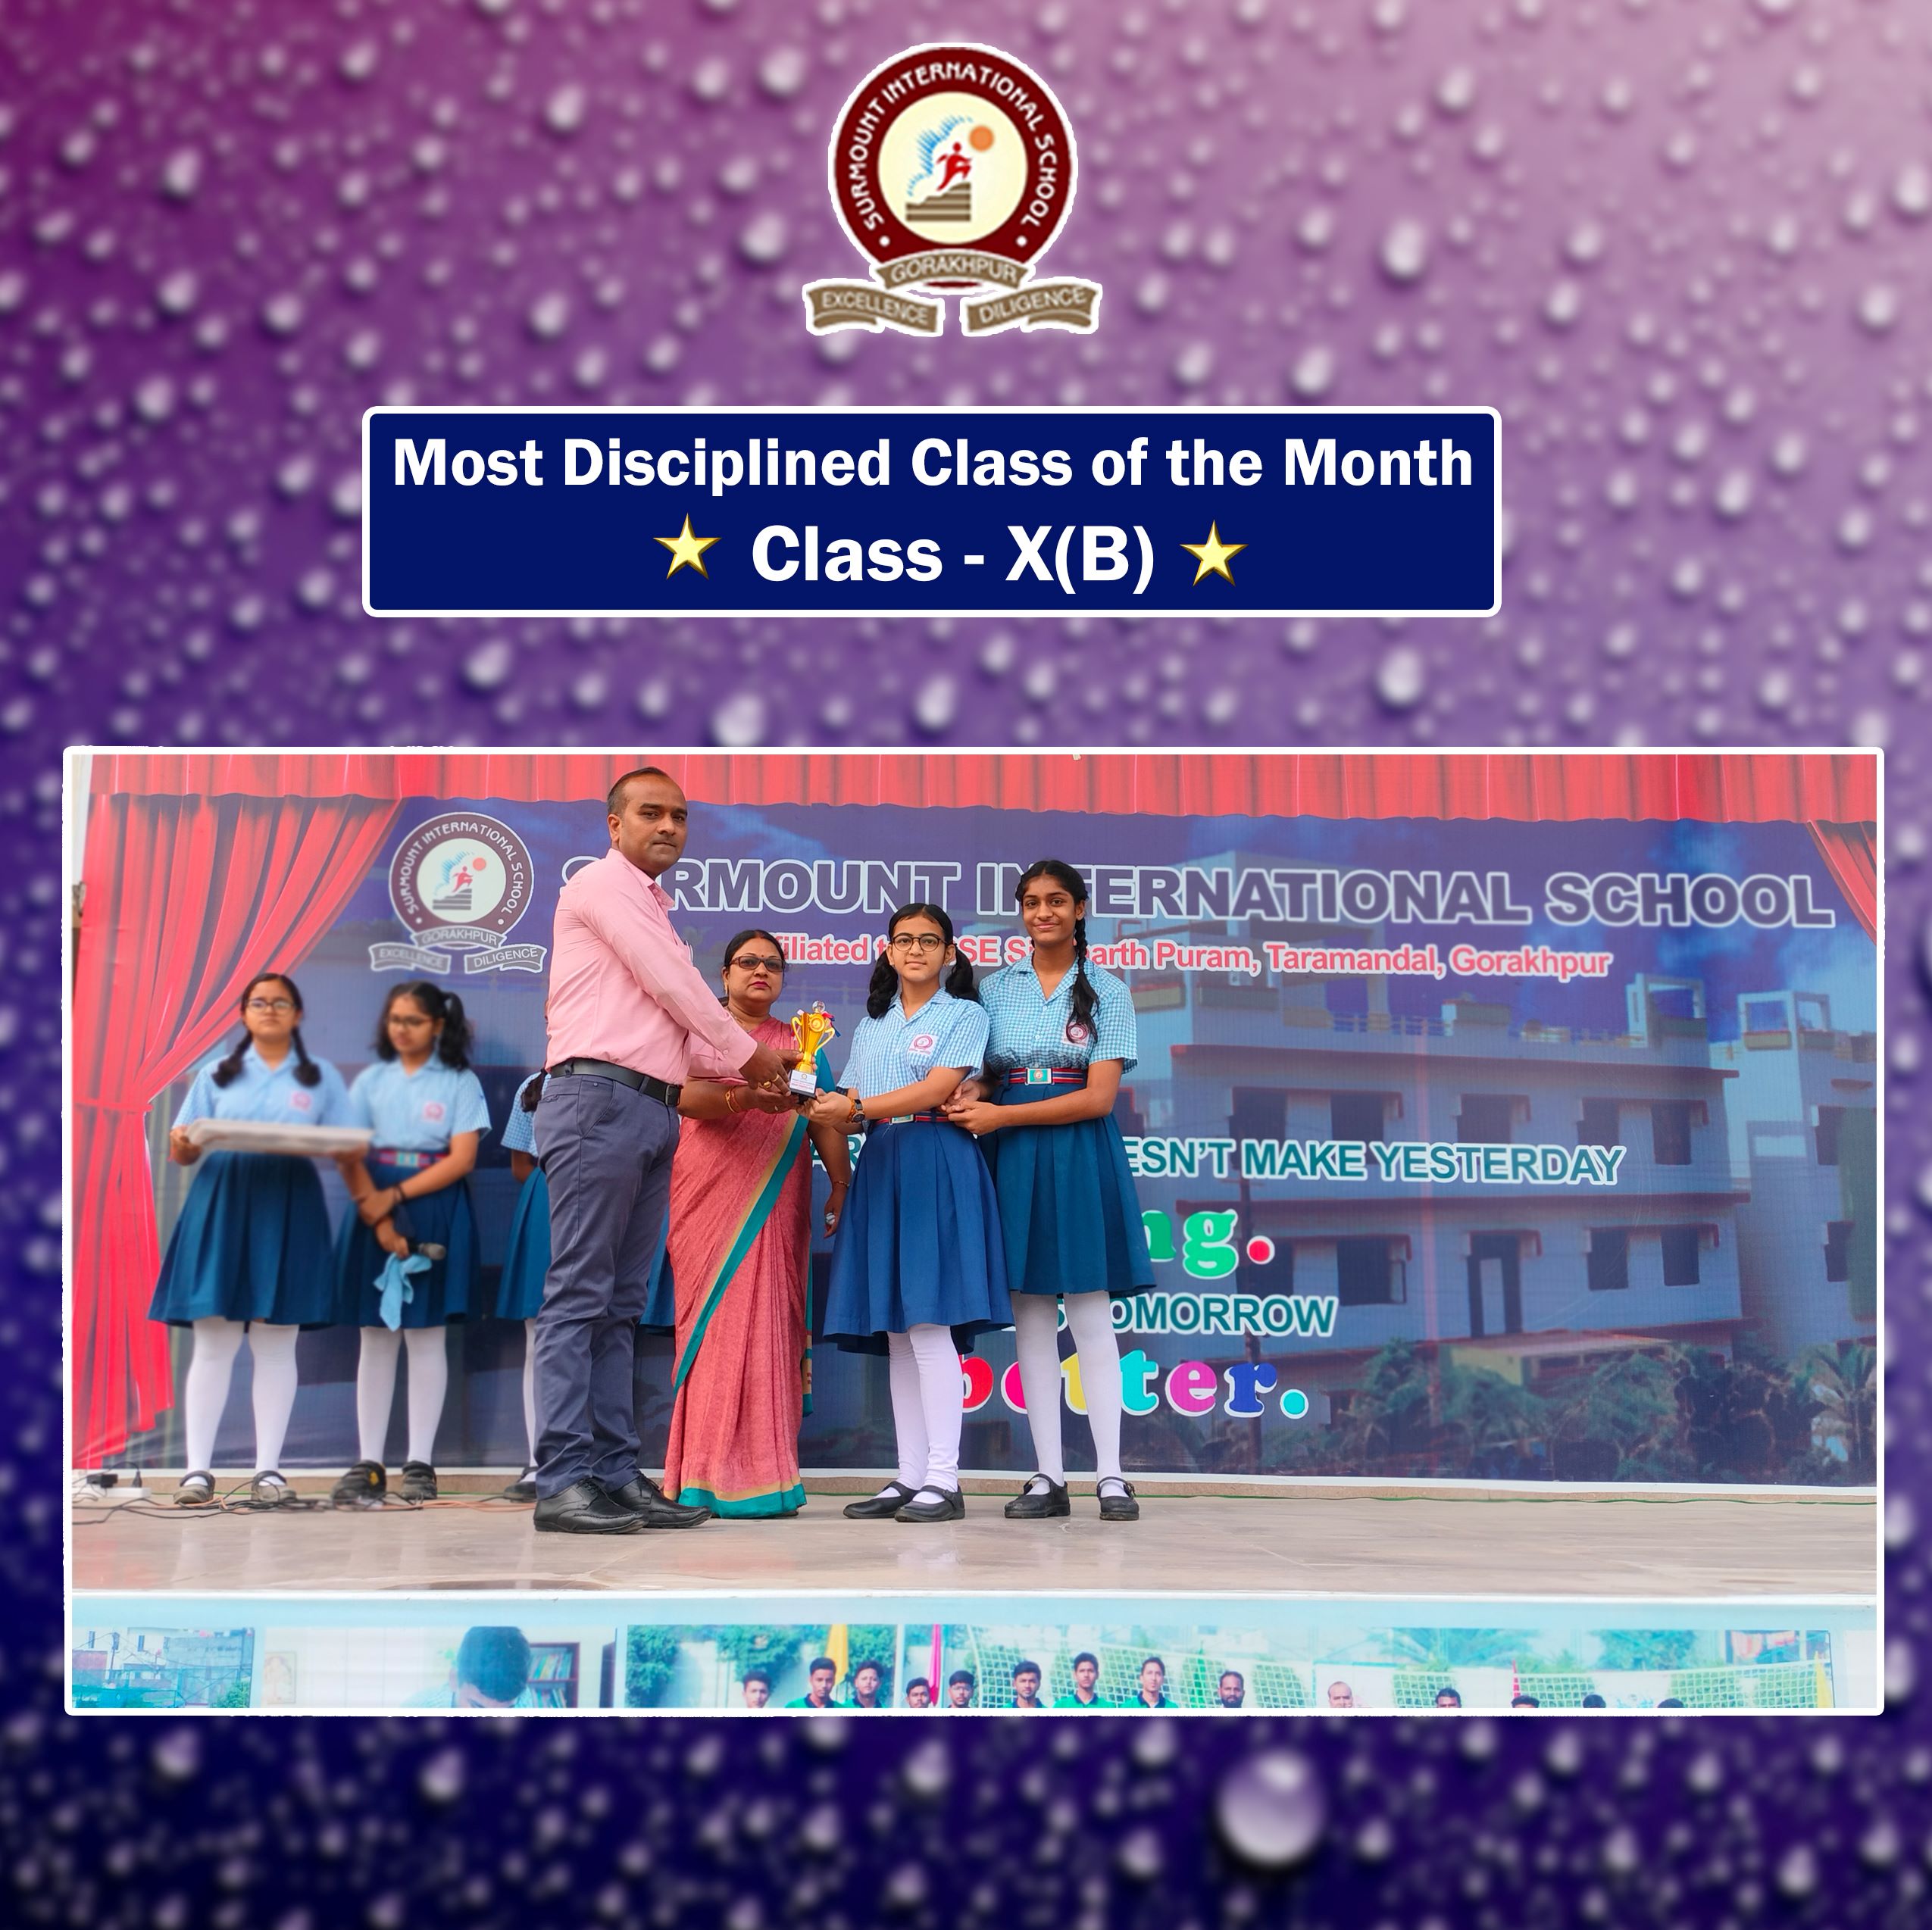 Most Disciplined Class of the Month - X (B)